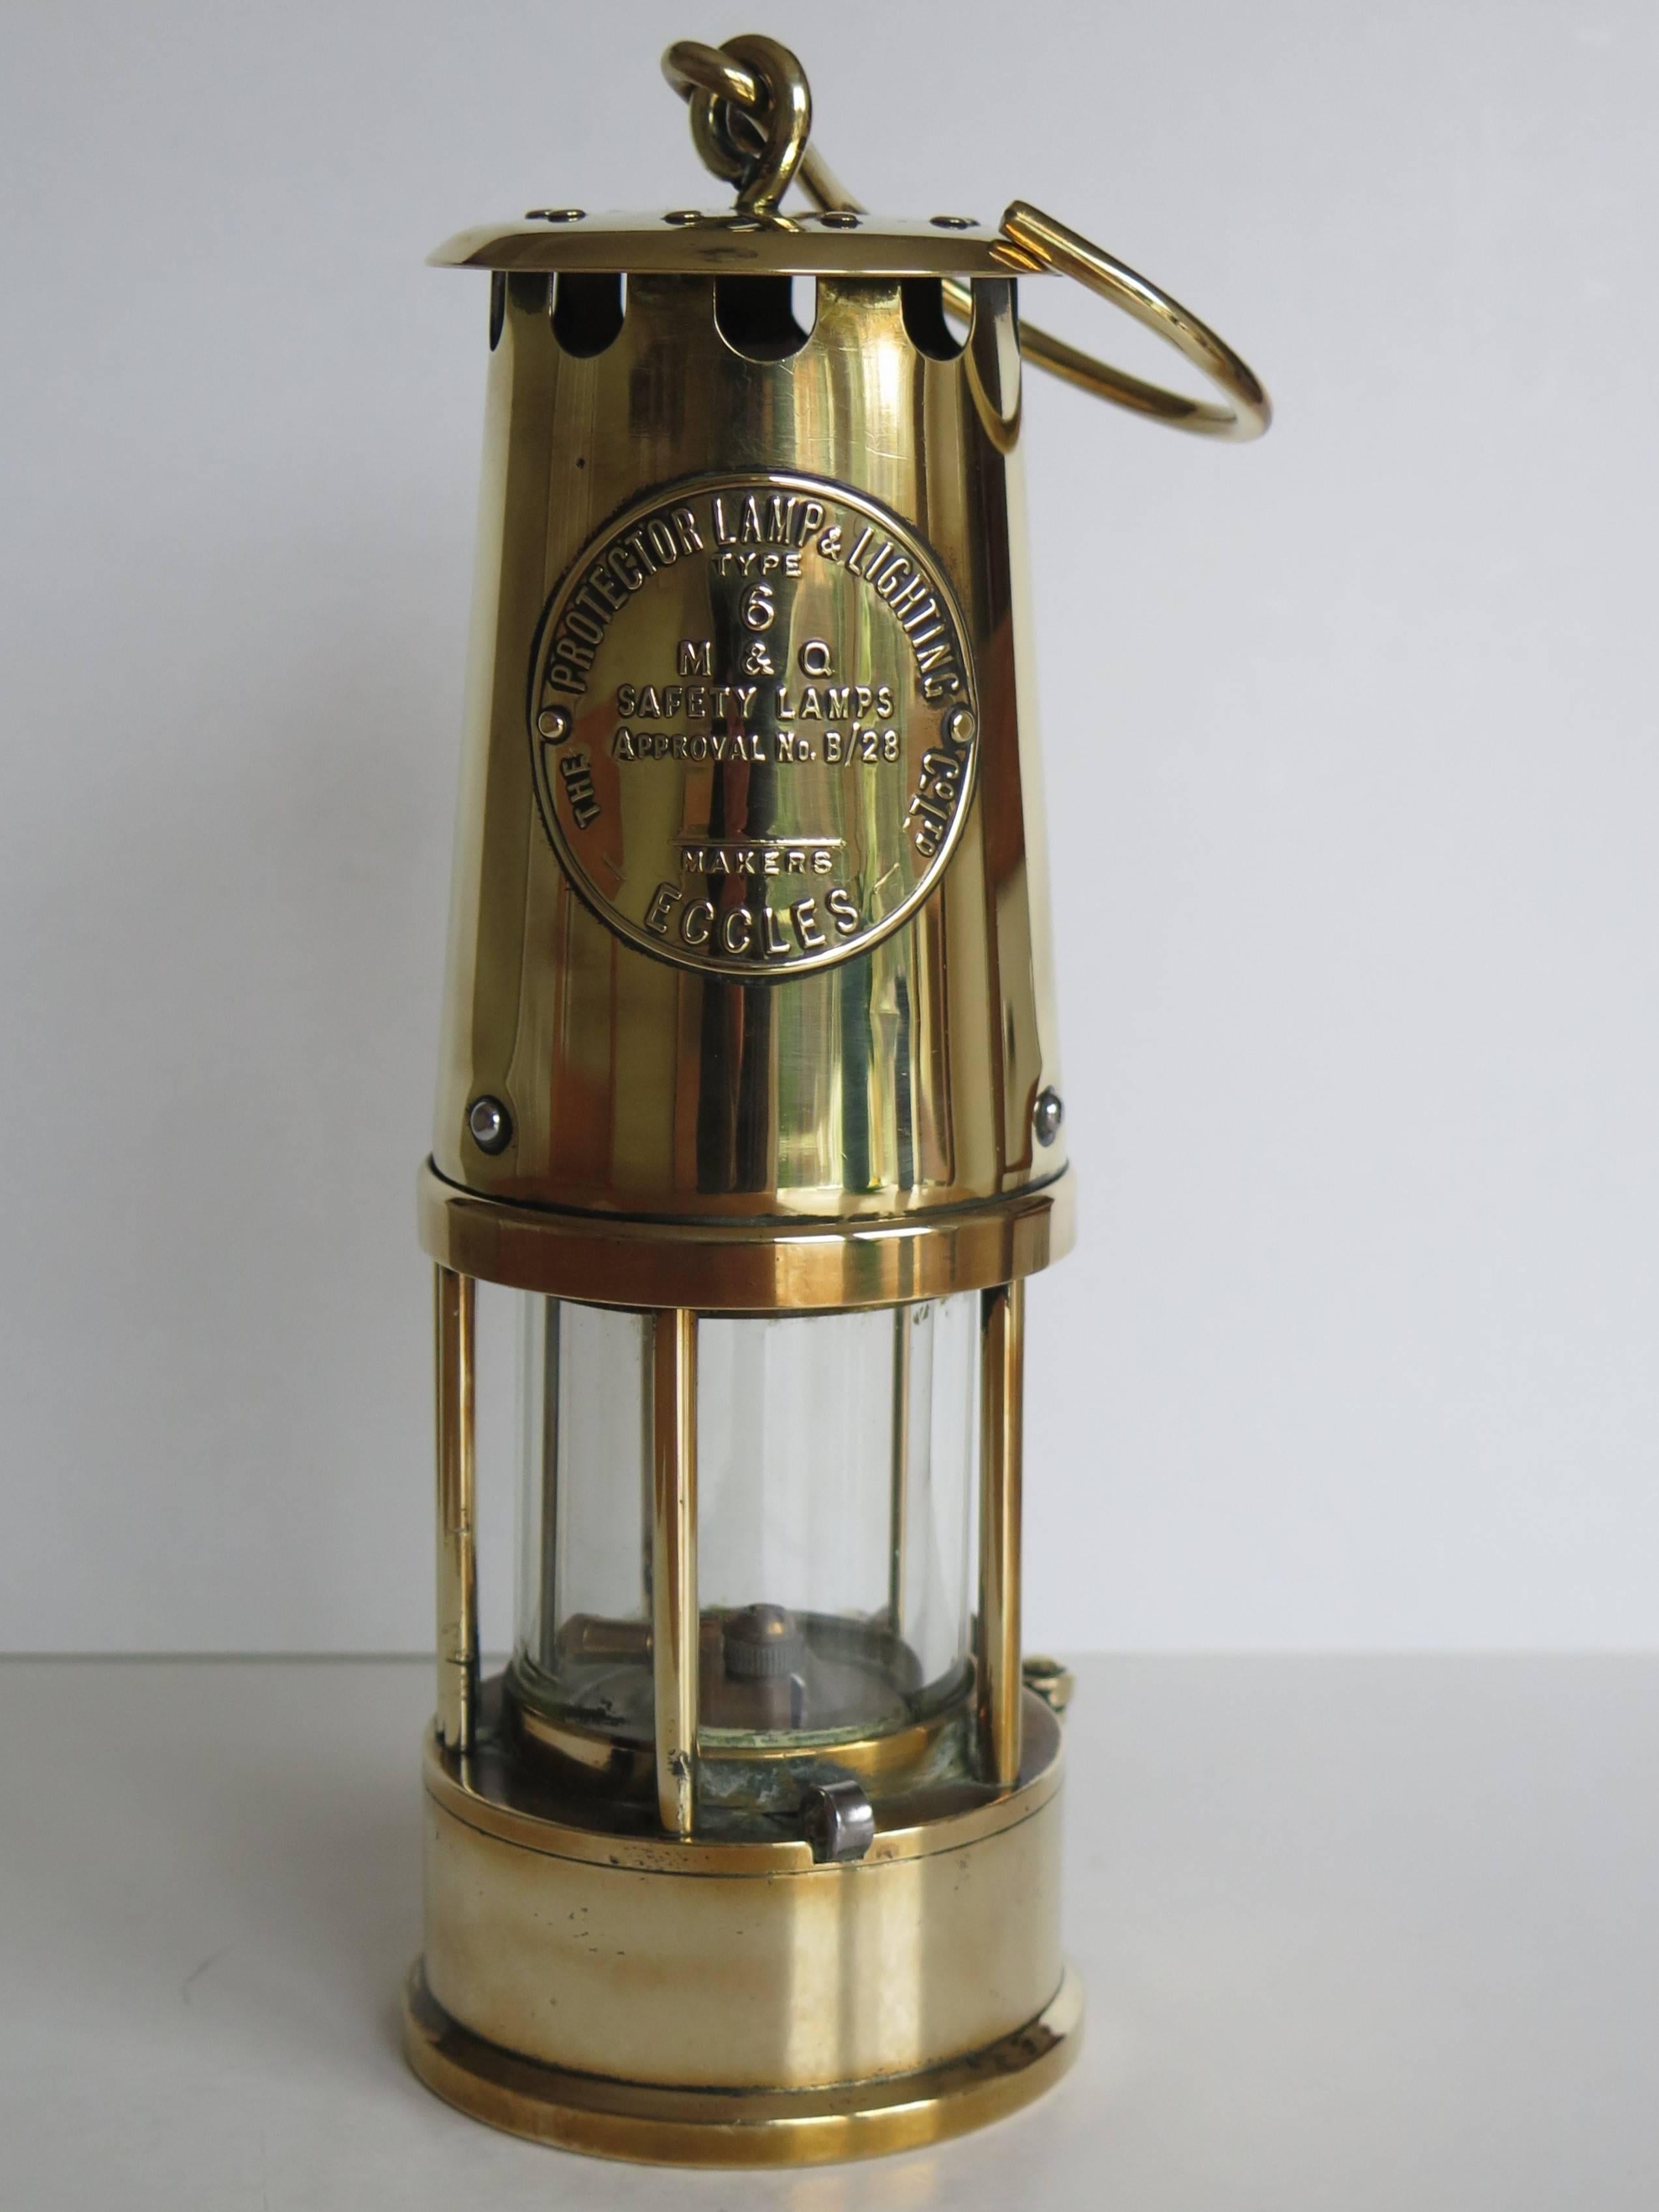 This is a very good, all brass, Miner's Lamp produced by The Protector Lamp and Lighting Company of Monton, Eccles, near Manchester, England, dating to the early / mid 20th Century, circa 1930.

This lamp is the Eccles Type 6 which is a flame safety